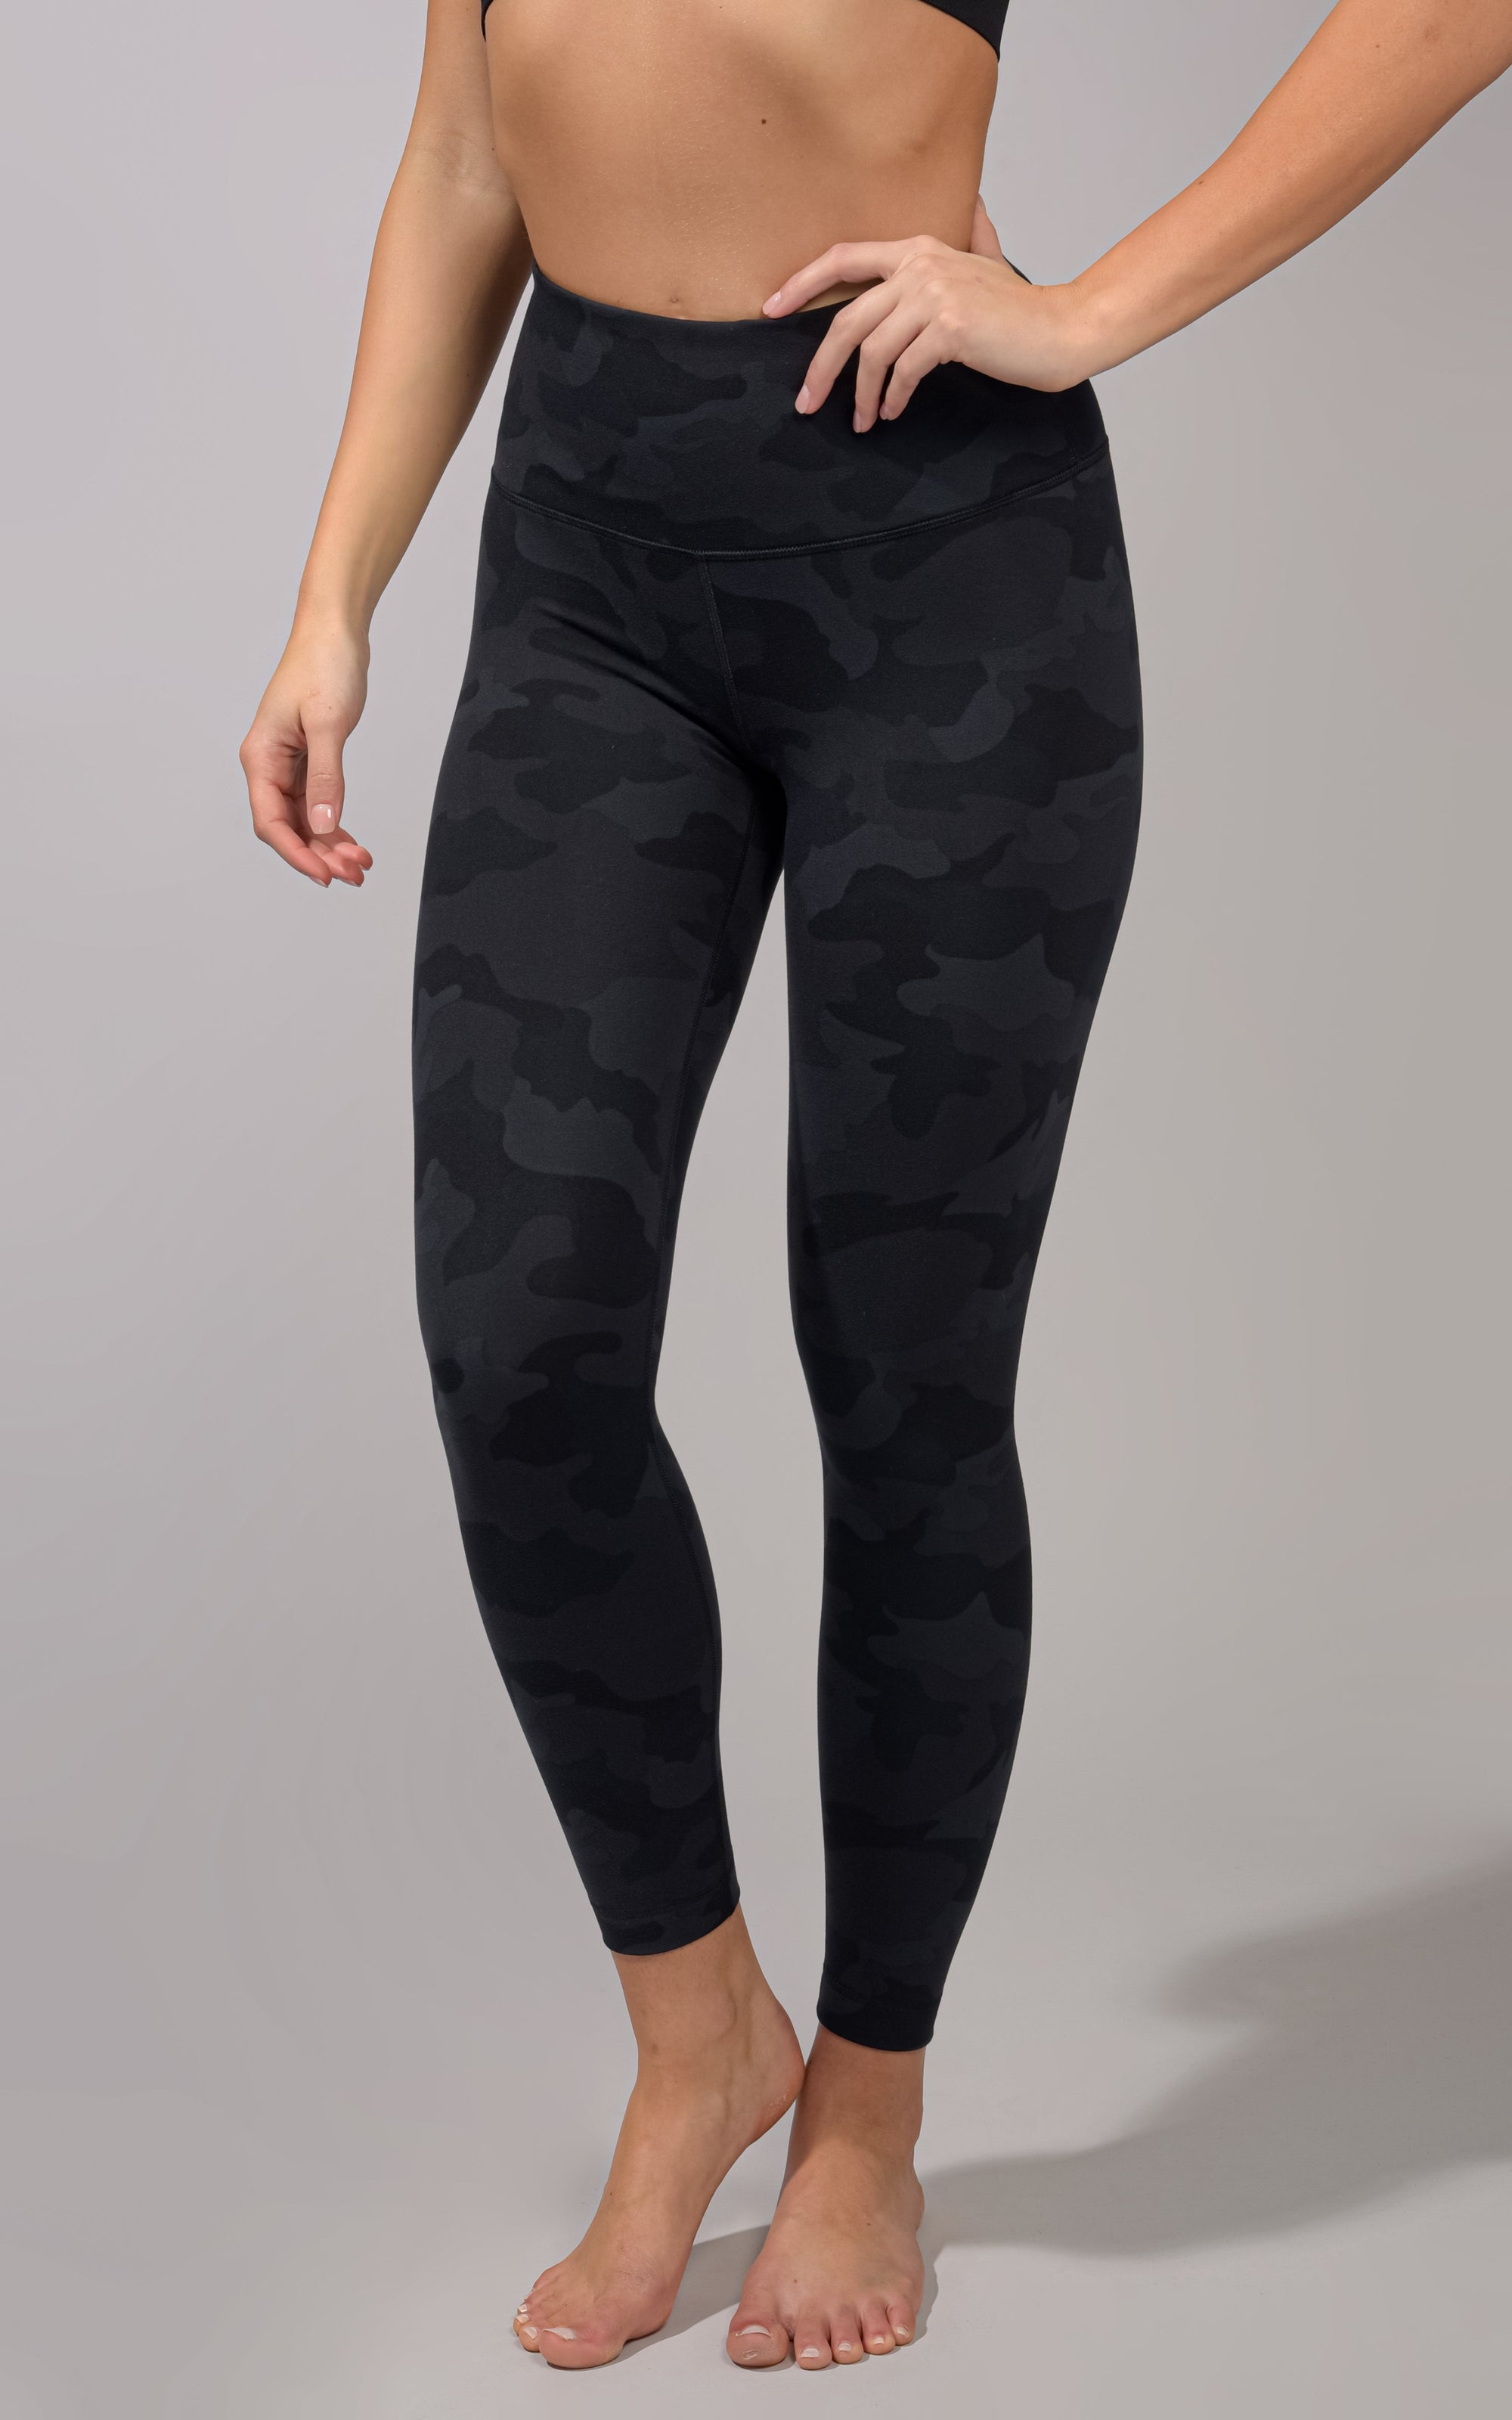 Yogalicious Lux High Waist Camo Printed 7/8 Ankle Legging